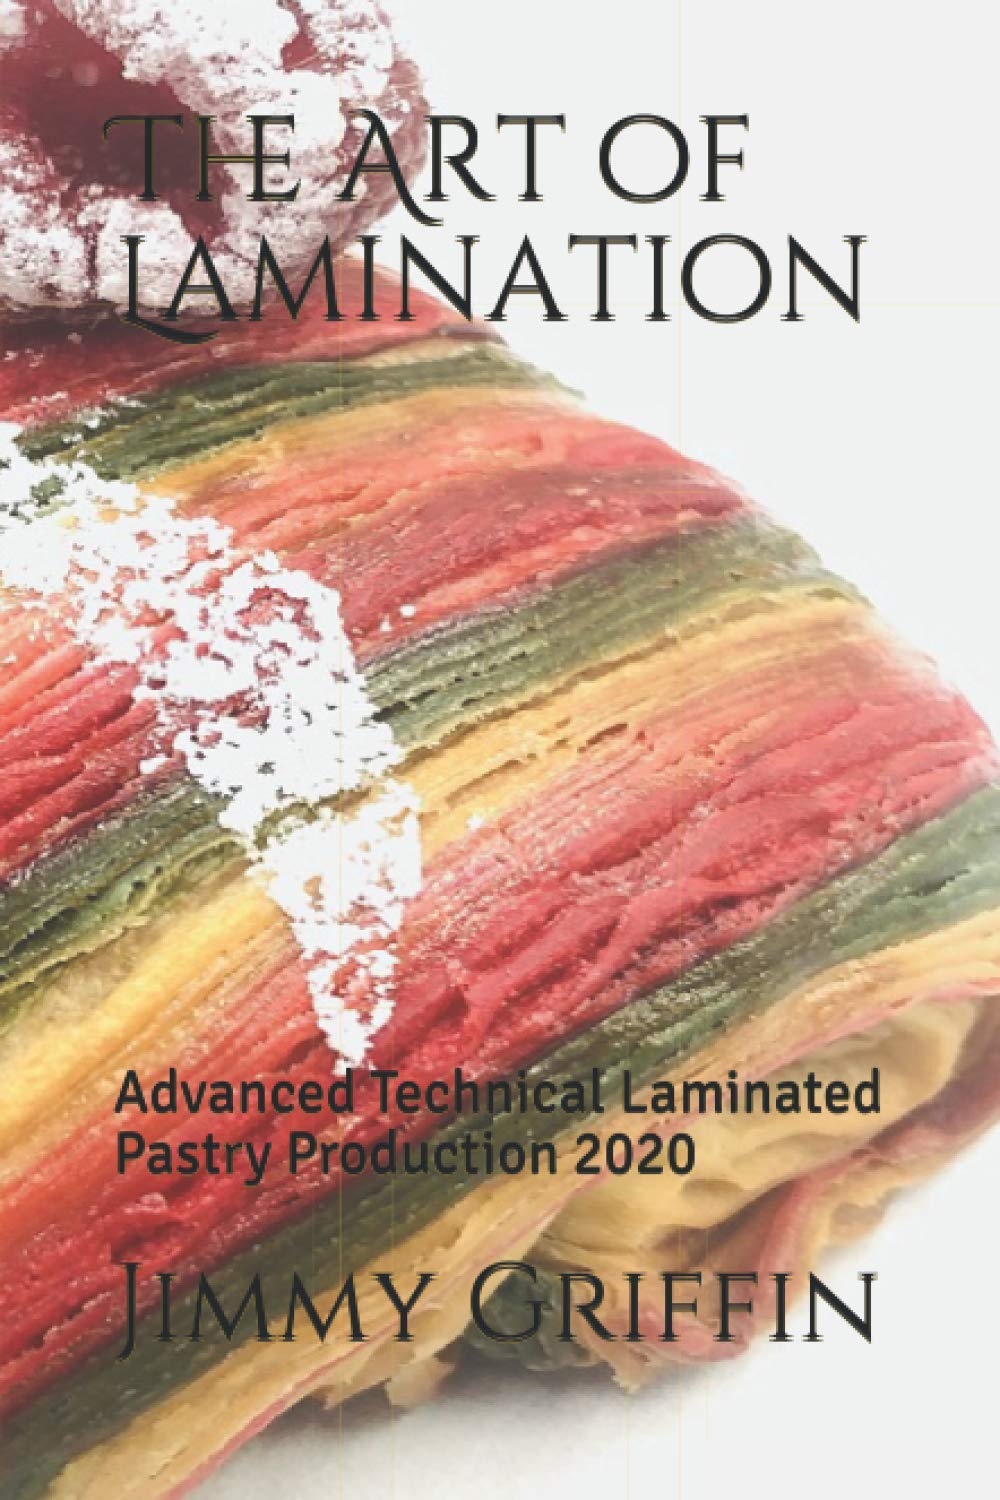 The Art of Lamination: Advanced Technical Laminated Pastry Production 2020 (Jimmy Griffin)